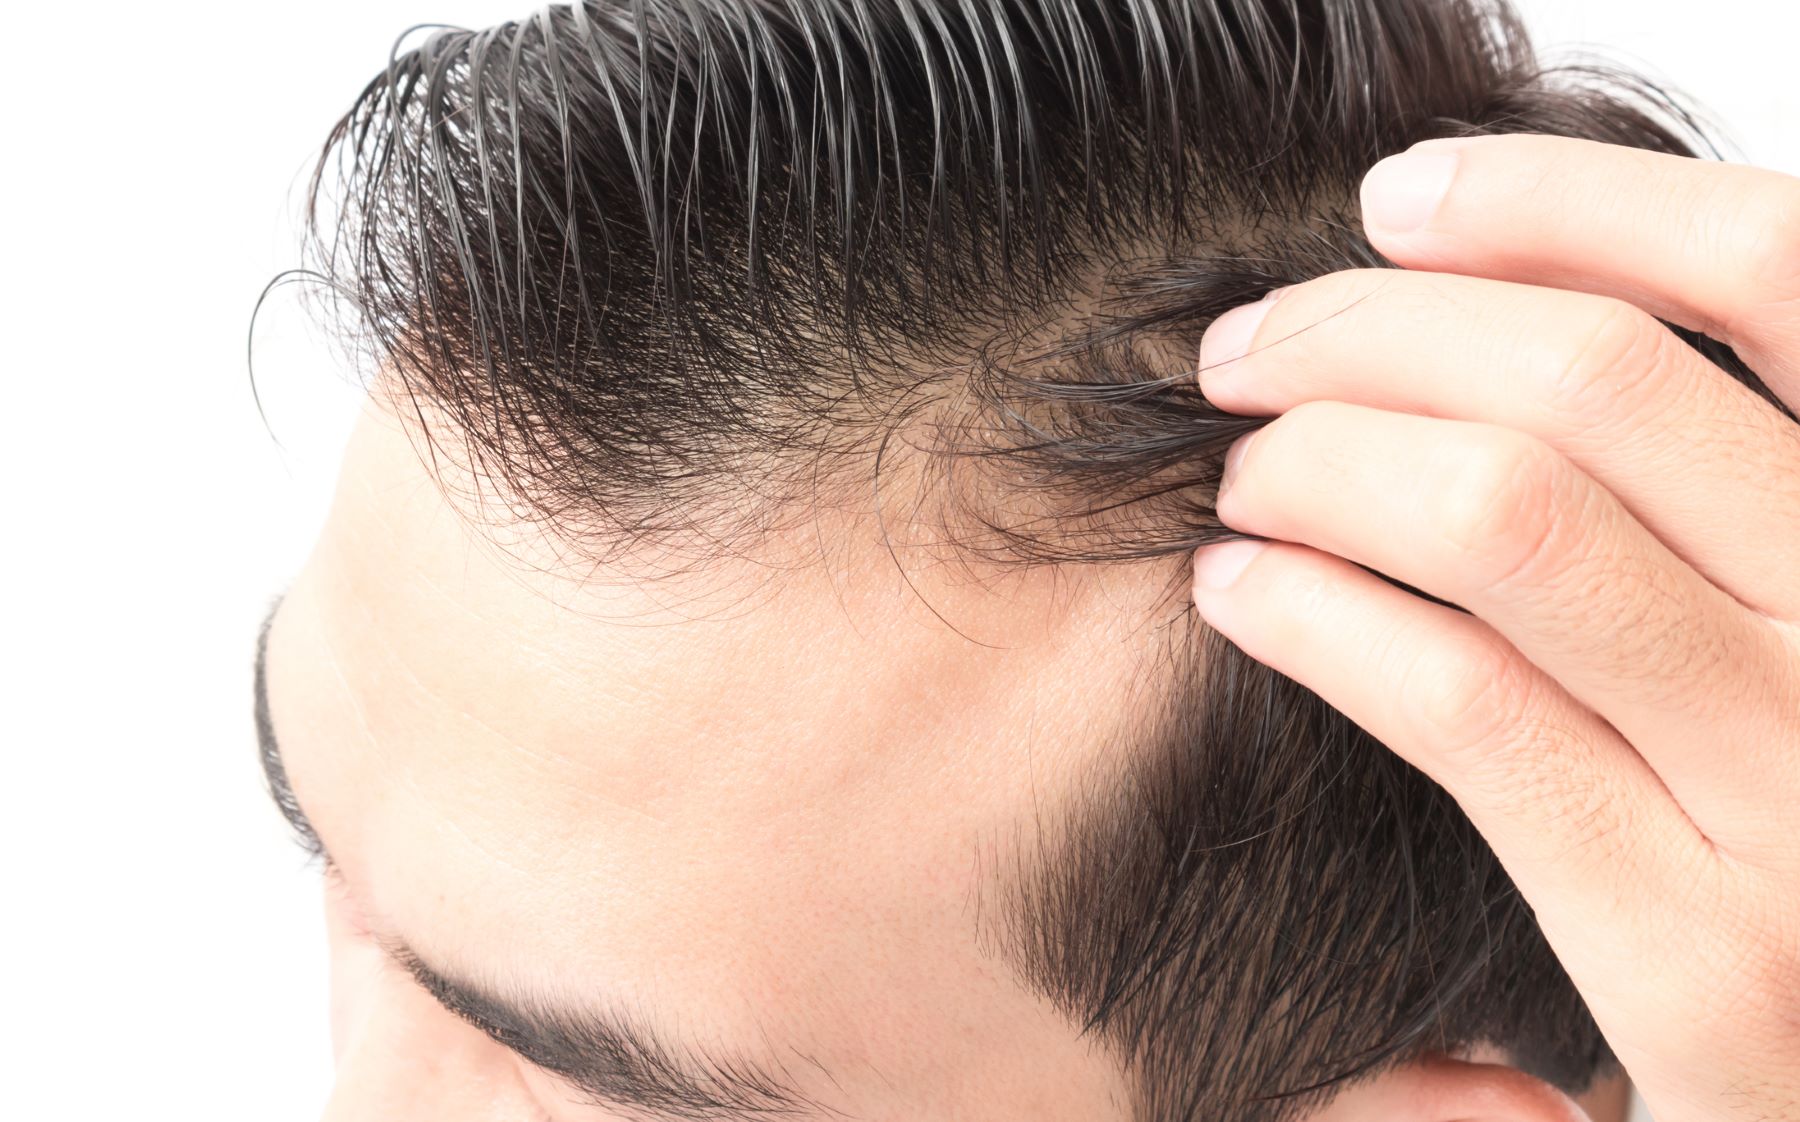 Man suspecting hair loss caused by his brow lift